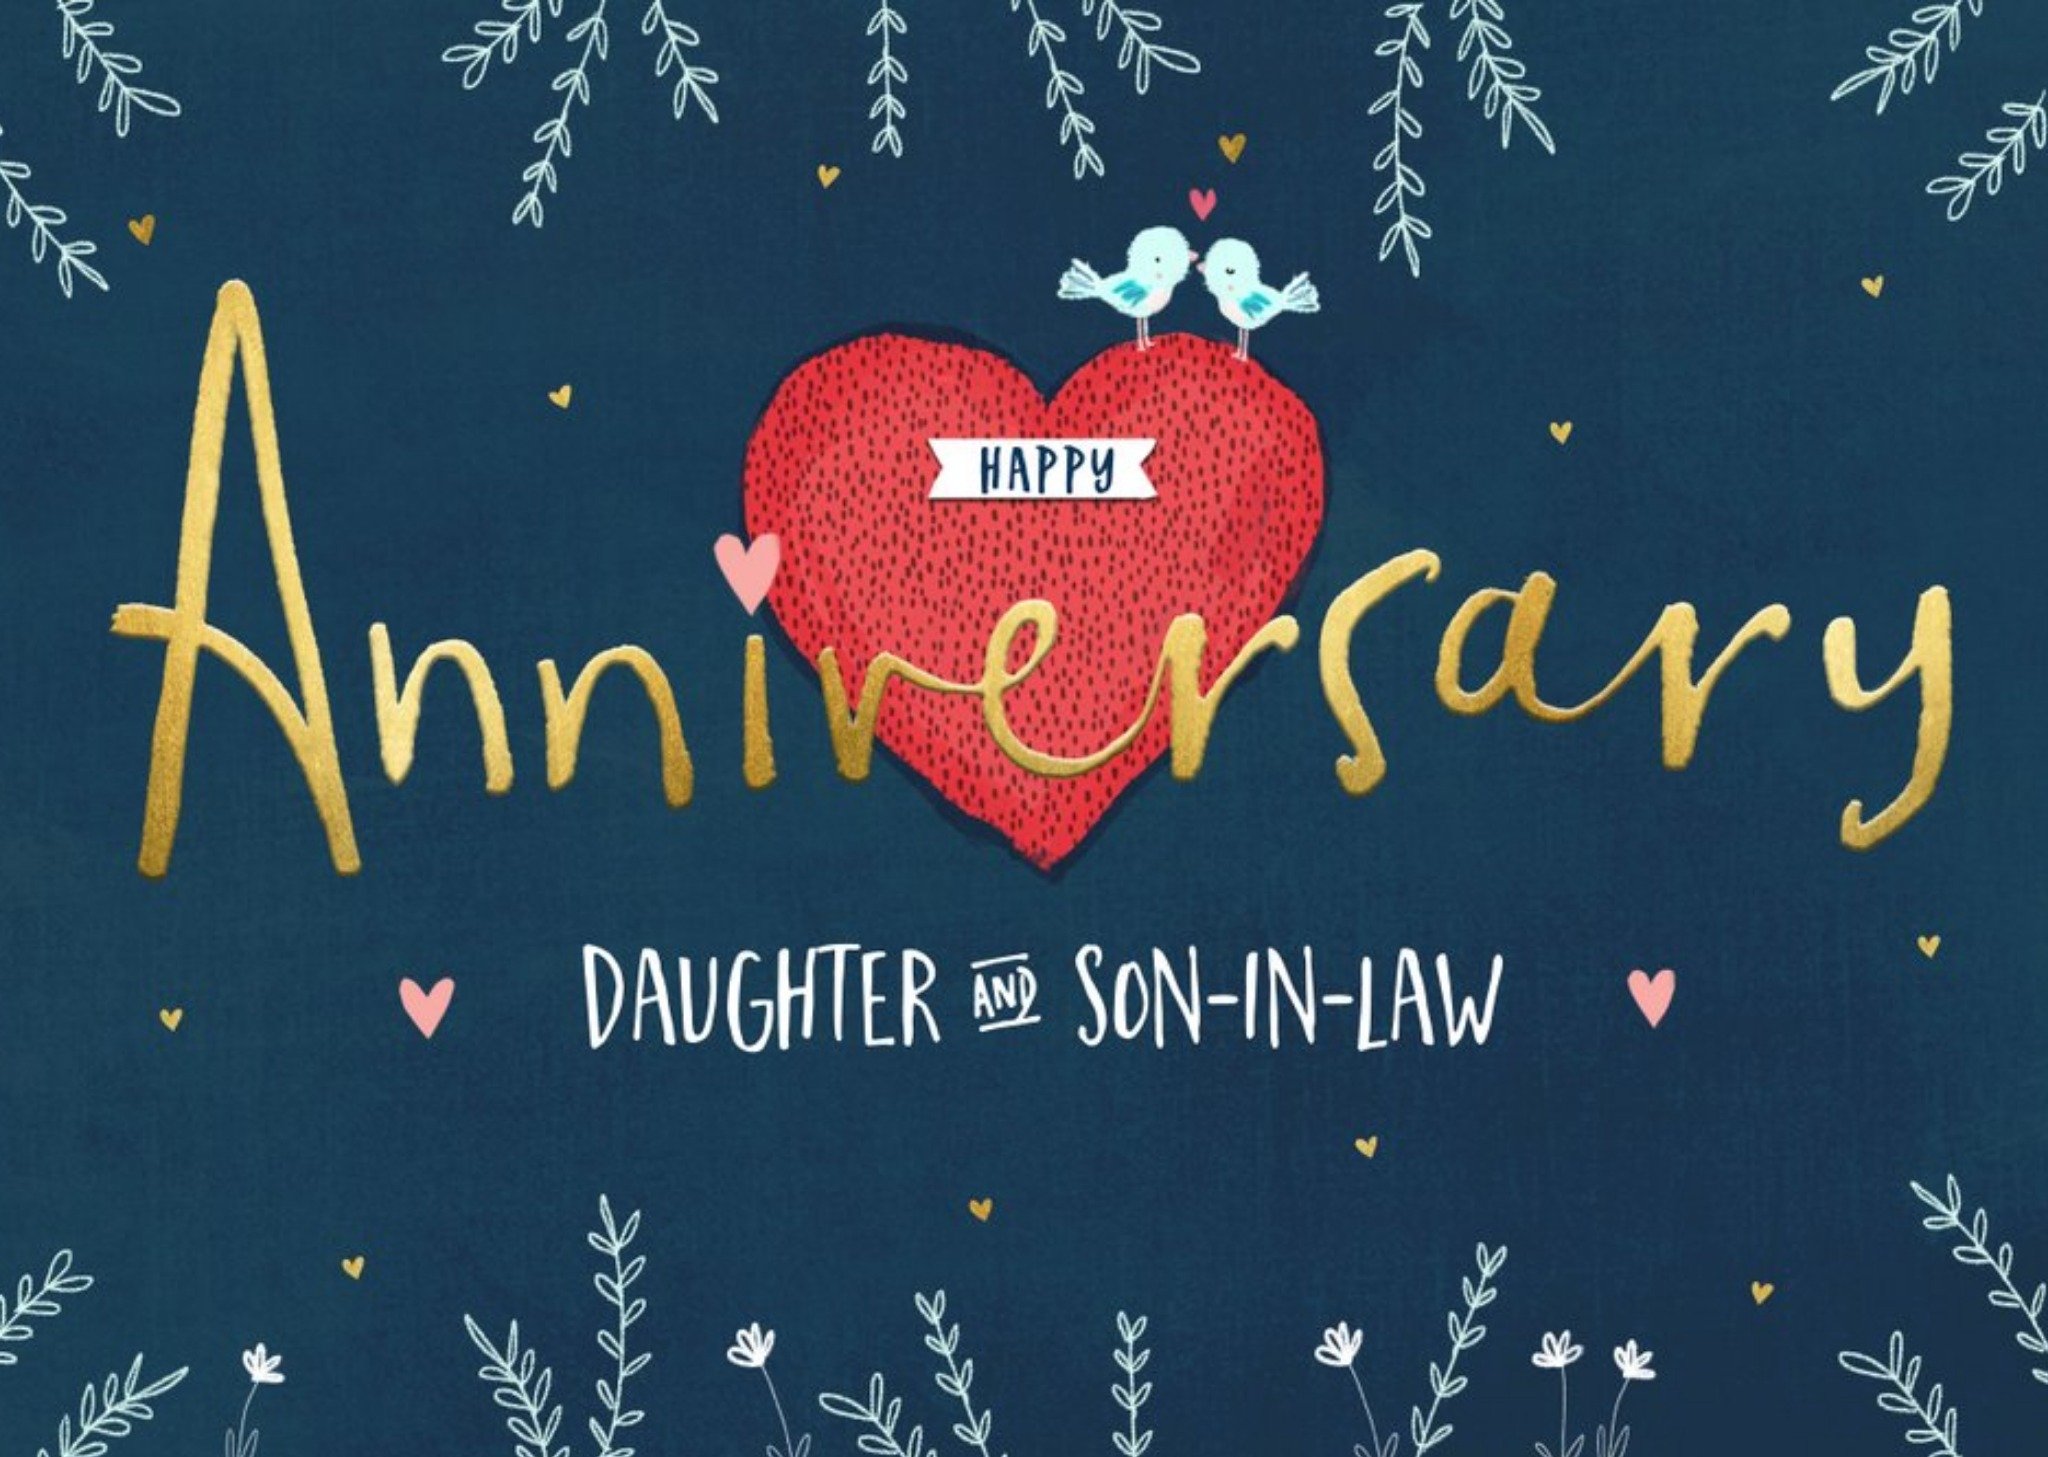 Moonpig Daughter And Son-In-Law Anniversary Card Ecard